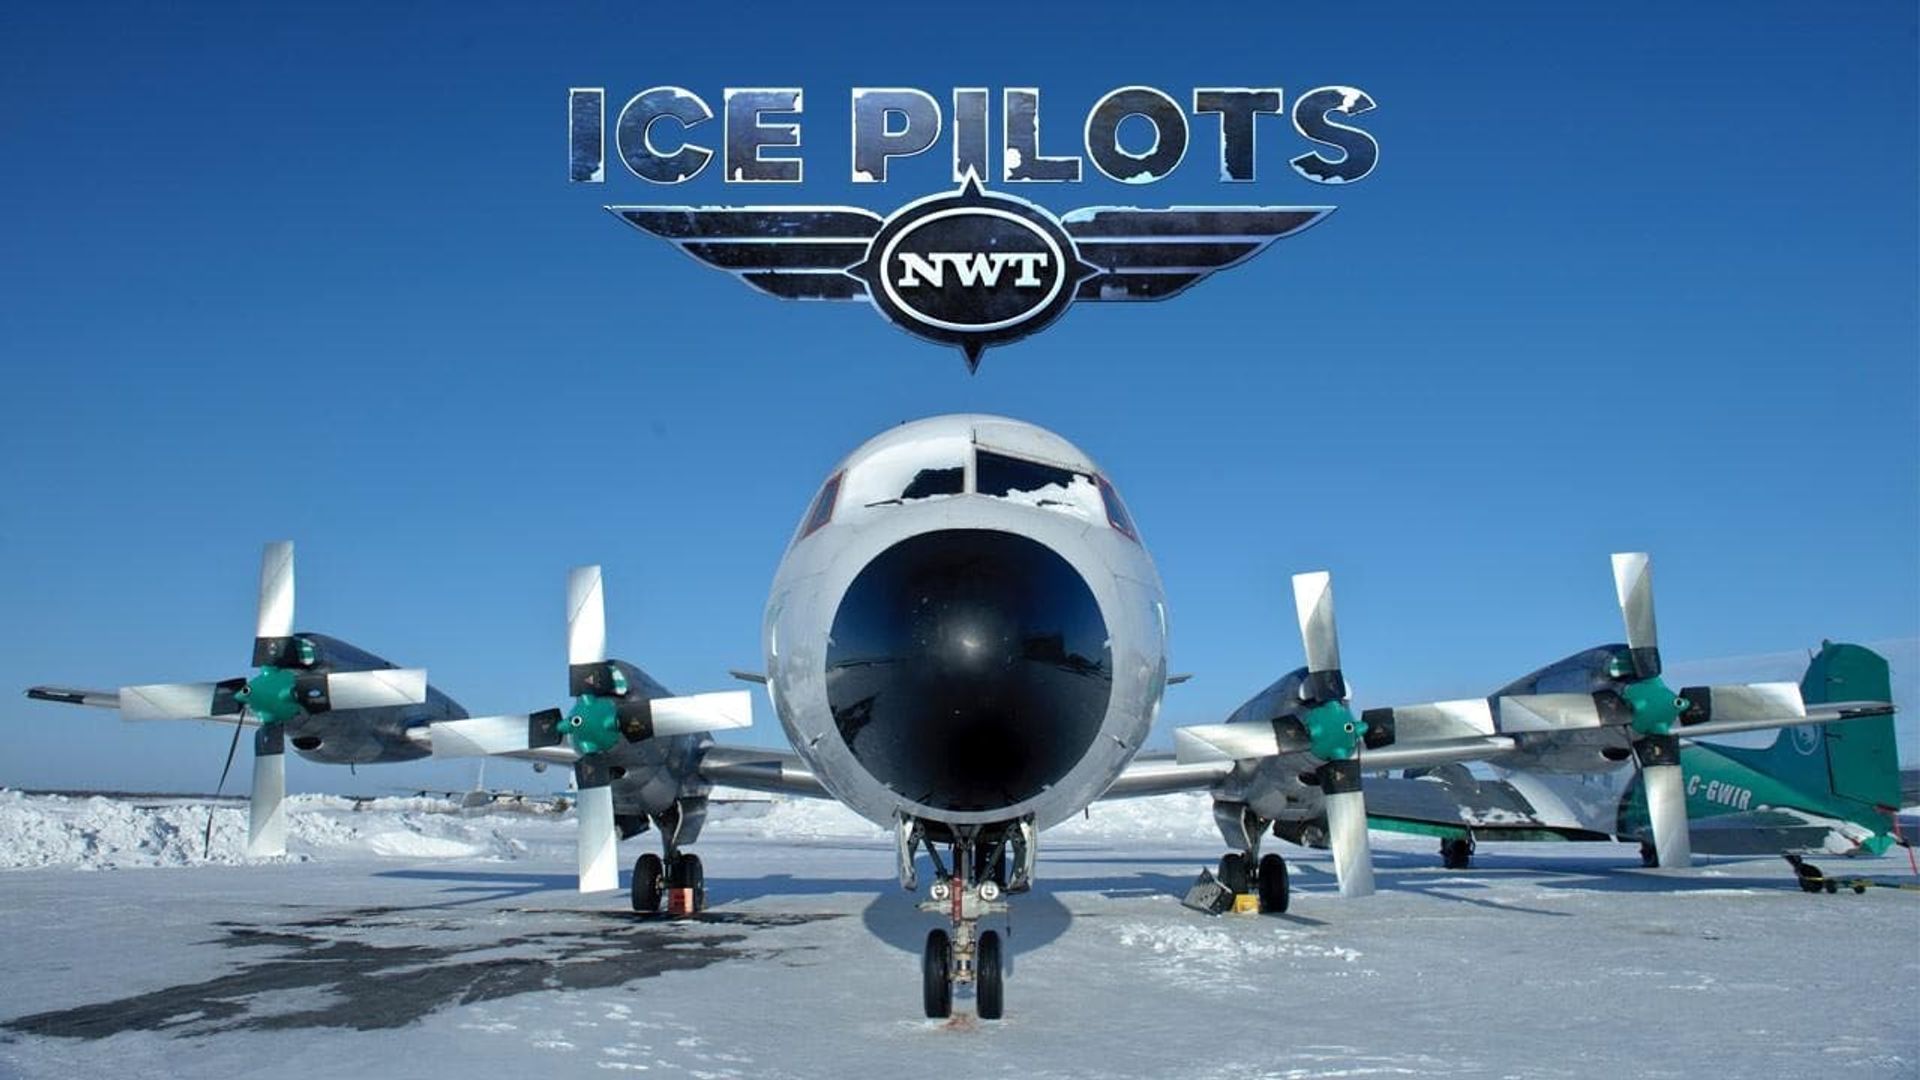 Ice Pilots NWT background